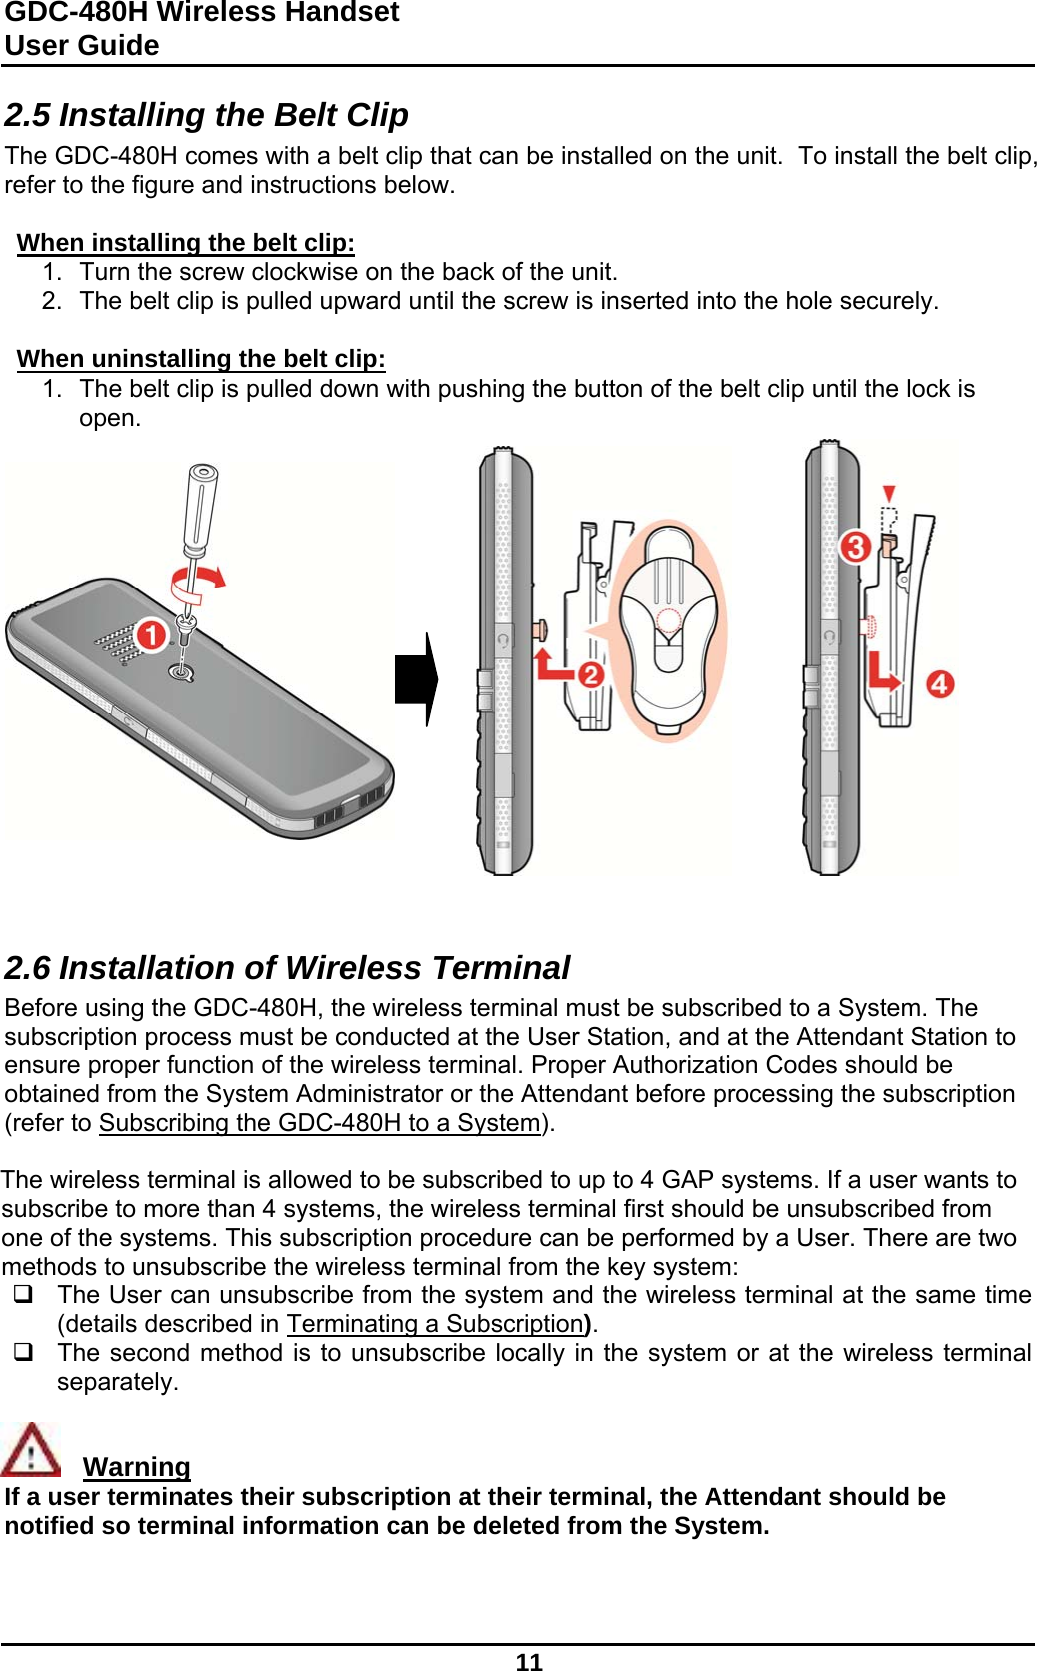 GDC-480H Wireless Handset User Guide   11  2.5 Installing the Belt Clip The GDC-480H comes with a belt clip that can be installed on the unit.  To install the belt clip, refer to the figure and instructions below.  When installing the belt clip: 1.  Turn the screw clockwise on the back of the unit.  2.  The belt clip is pulled upward until the screw is inserted into the hole securely.  When uninstalling the belt clip: 1.  The belt clip is pulled down with pushing the button of the belt clip until the lock is open.                   2.6 Installation of Wireless Terminal Before using the GDC-480H, the wireless terminal must be subscribed to a System. The subscription process must be conducted at the User Station, and at the Attendant Station to ensure proper function of the wireless terminal. Proper Authorization Codes should be obtained from the System Administrator or the Attendant before processing the subscription (refer to Subscribing the GDC-480H to a System).  The wireless terminal is allowed to be subscribed to up to 4 GAP systems. If a user wants to subscribe to more than 4 systems, the wireless terminal first should be unsubscribed from one of the systems. This subscription procedure can be performed by a User. There are two methods to unsubscribe the wireless terminal from the key system:   The User can unsubscribe from the system and the wireless terminal at the same time (details described in Terminating a Subscription).   The second method is to unsubscribe locally in the system or at the wireless terminal separately.     Warning If a user terminates their subscription at their terminal, the Attendant should be notified so terminal information can be deleted from the System.   